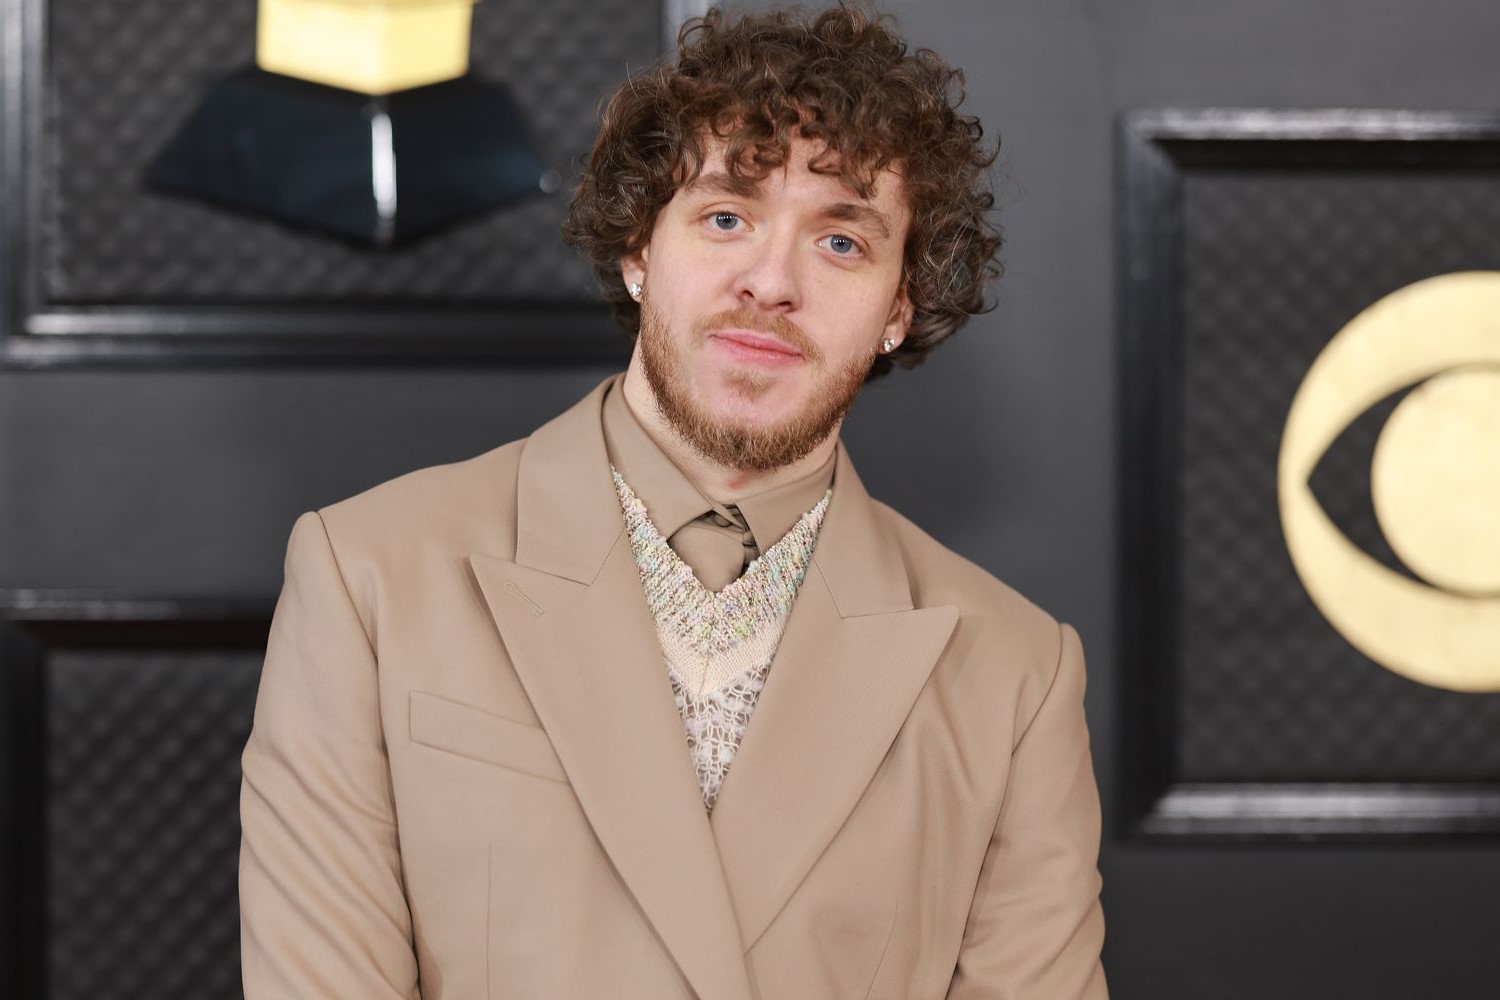 Jack Harlow Refuses To Disclose His Dog’s Name, Citing Respect For Her Privacy